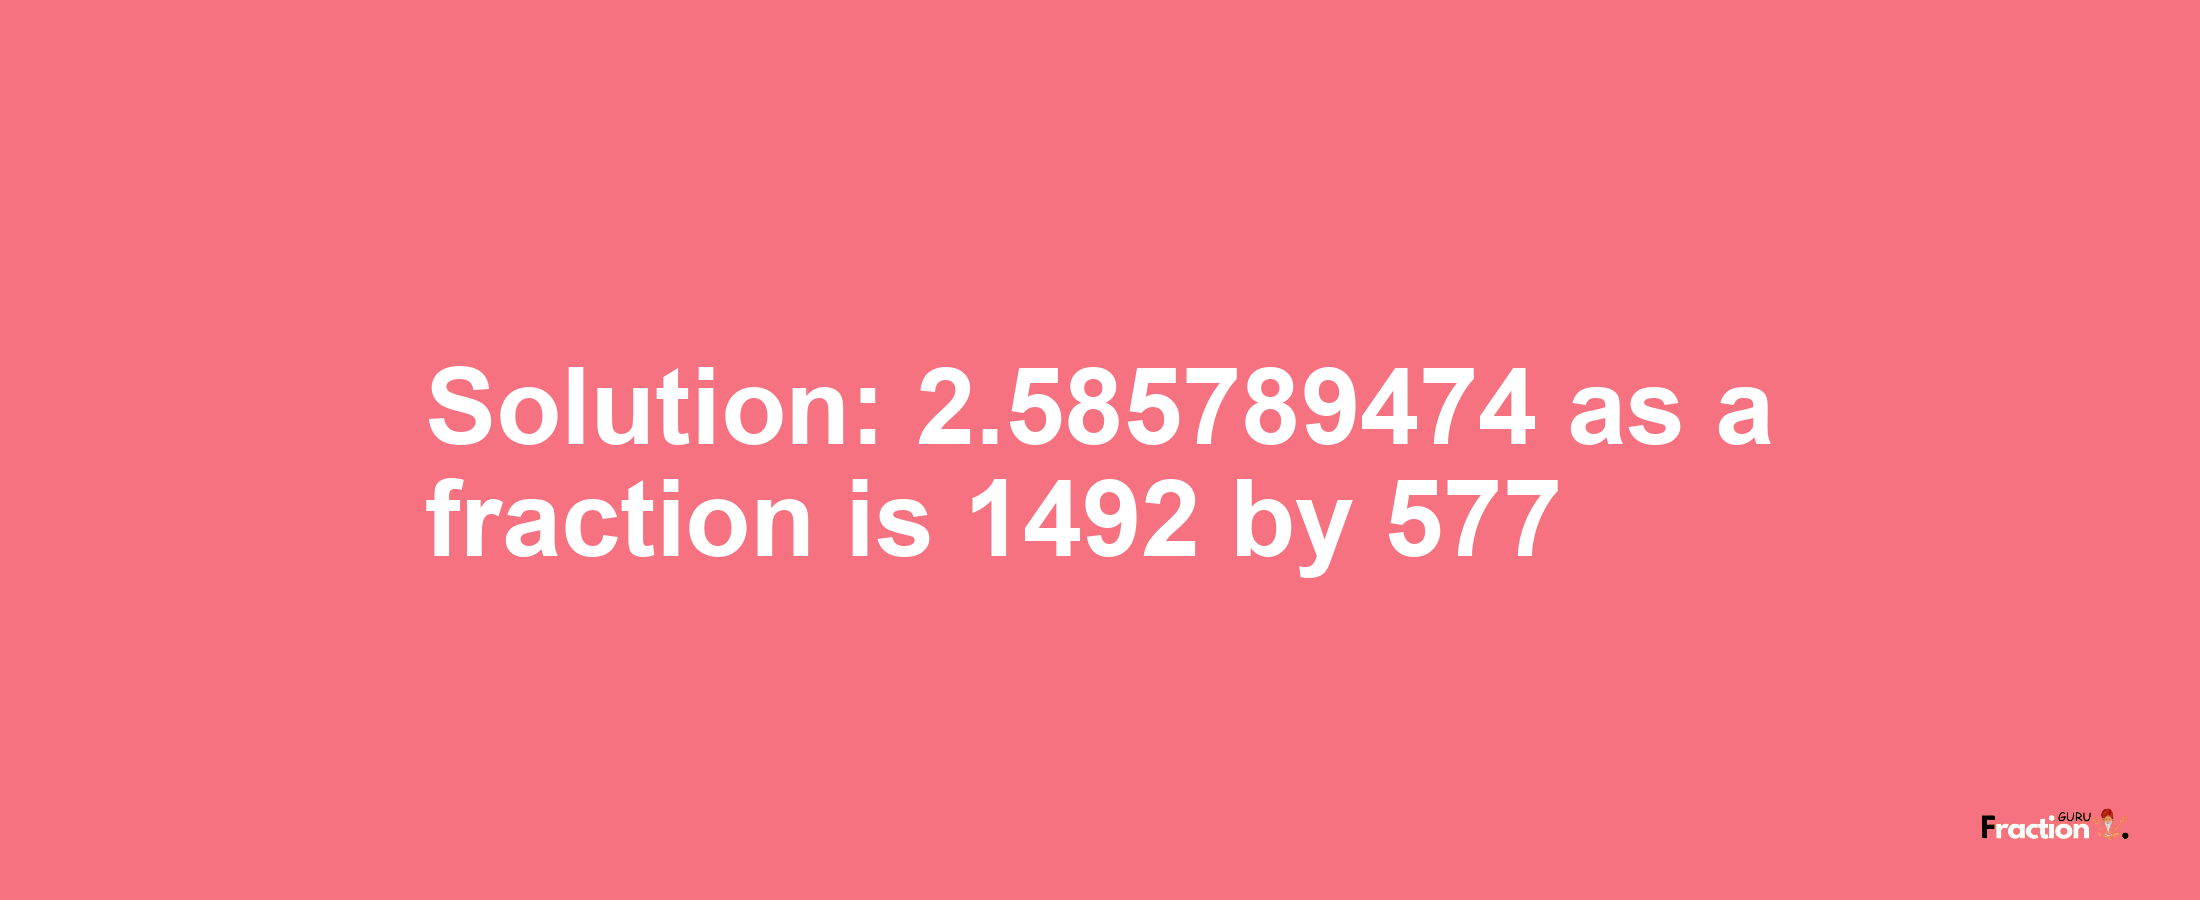 Solution:2.585789474 as a fraction is 1492/577